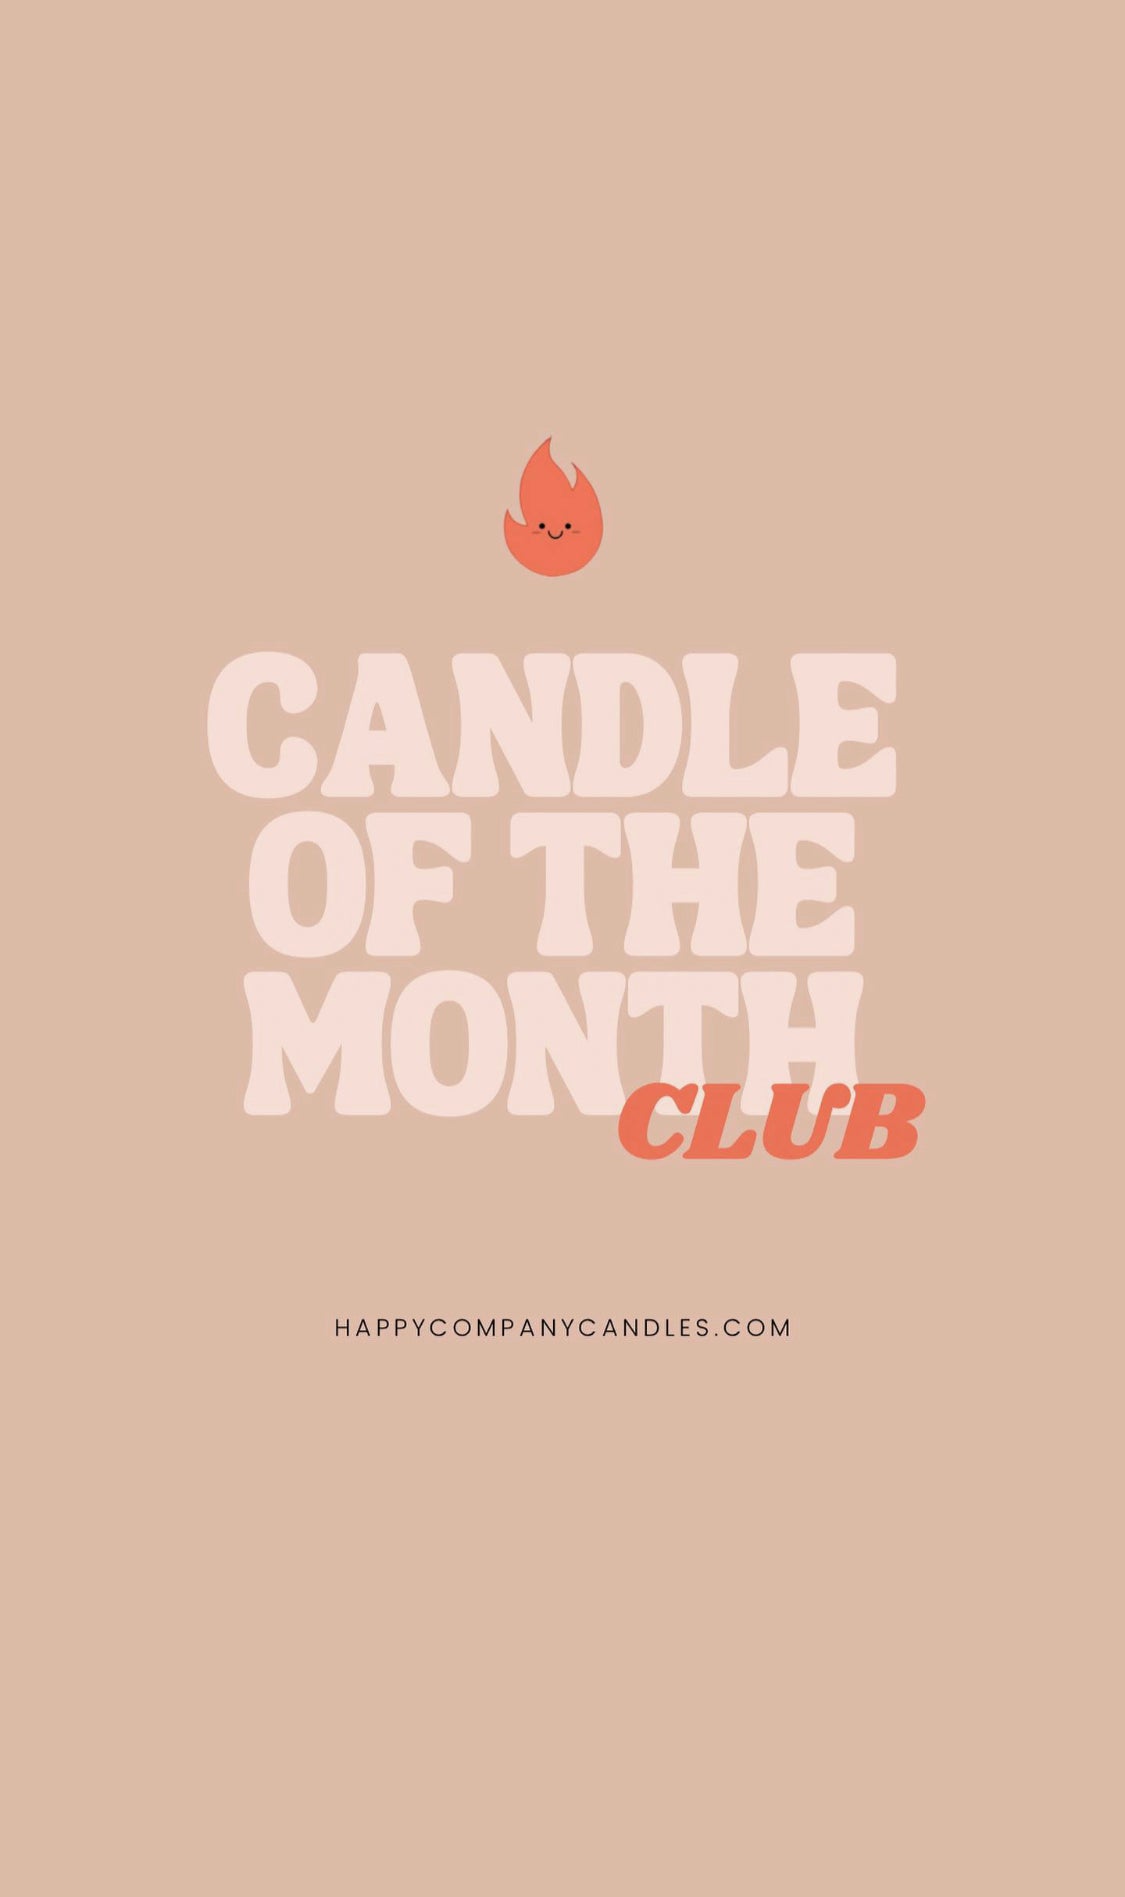 Scent Of The Month Wax Melts – Good Life Candle & Craft